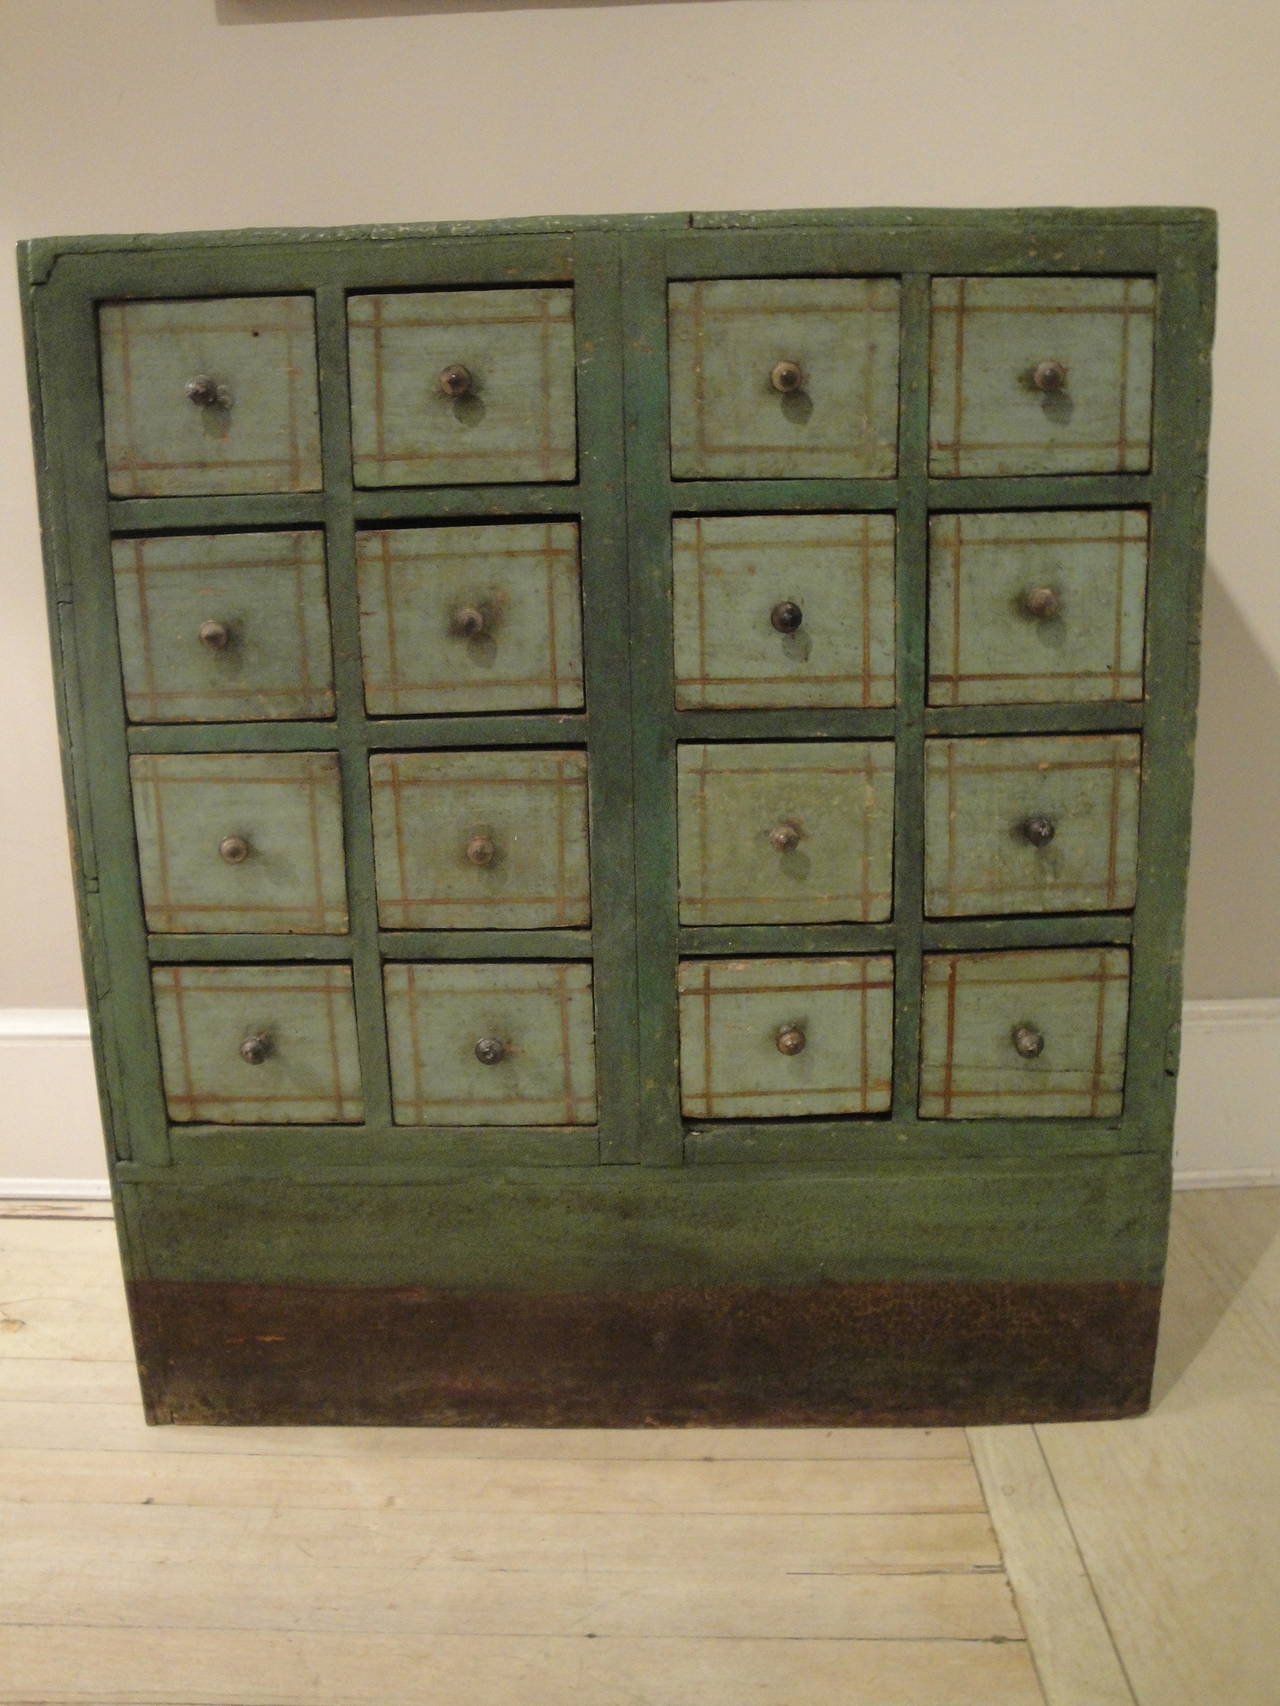 19th century French painted apothecary chest with 16 dovetailed drawers and original brass pulls.